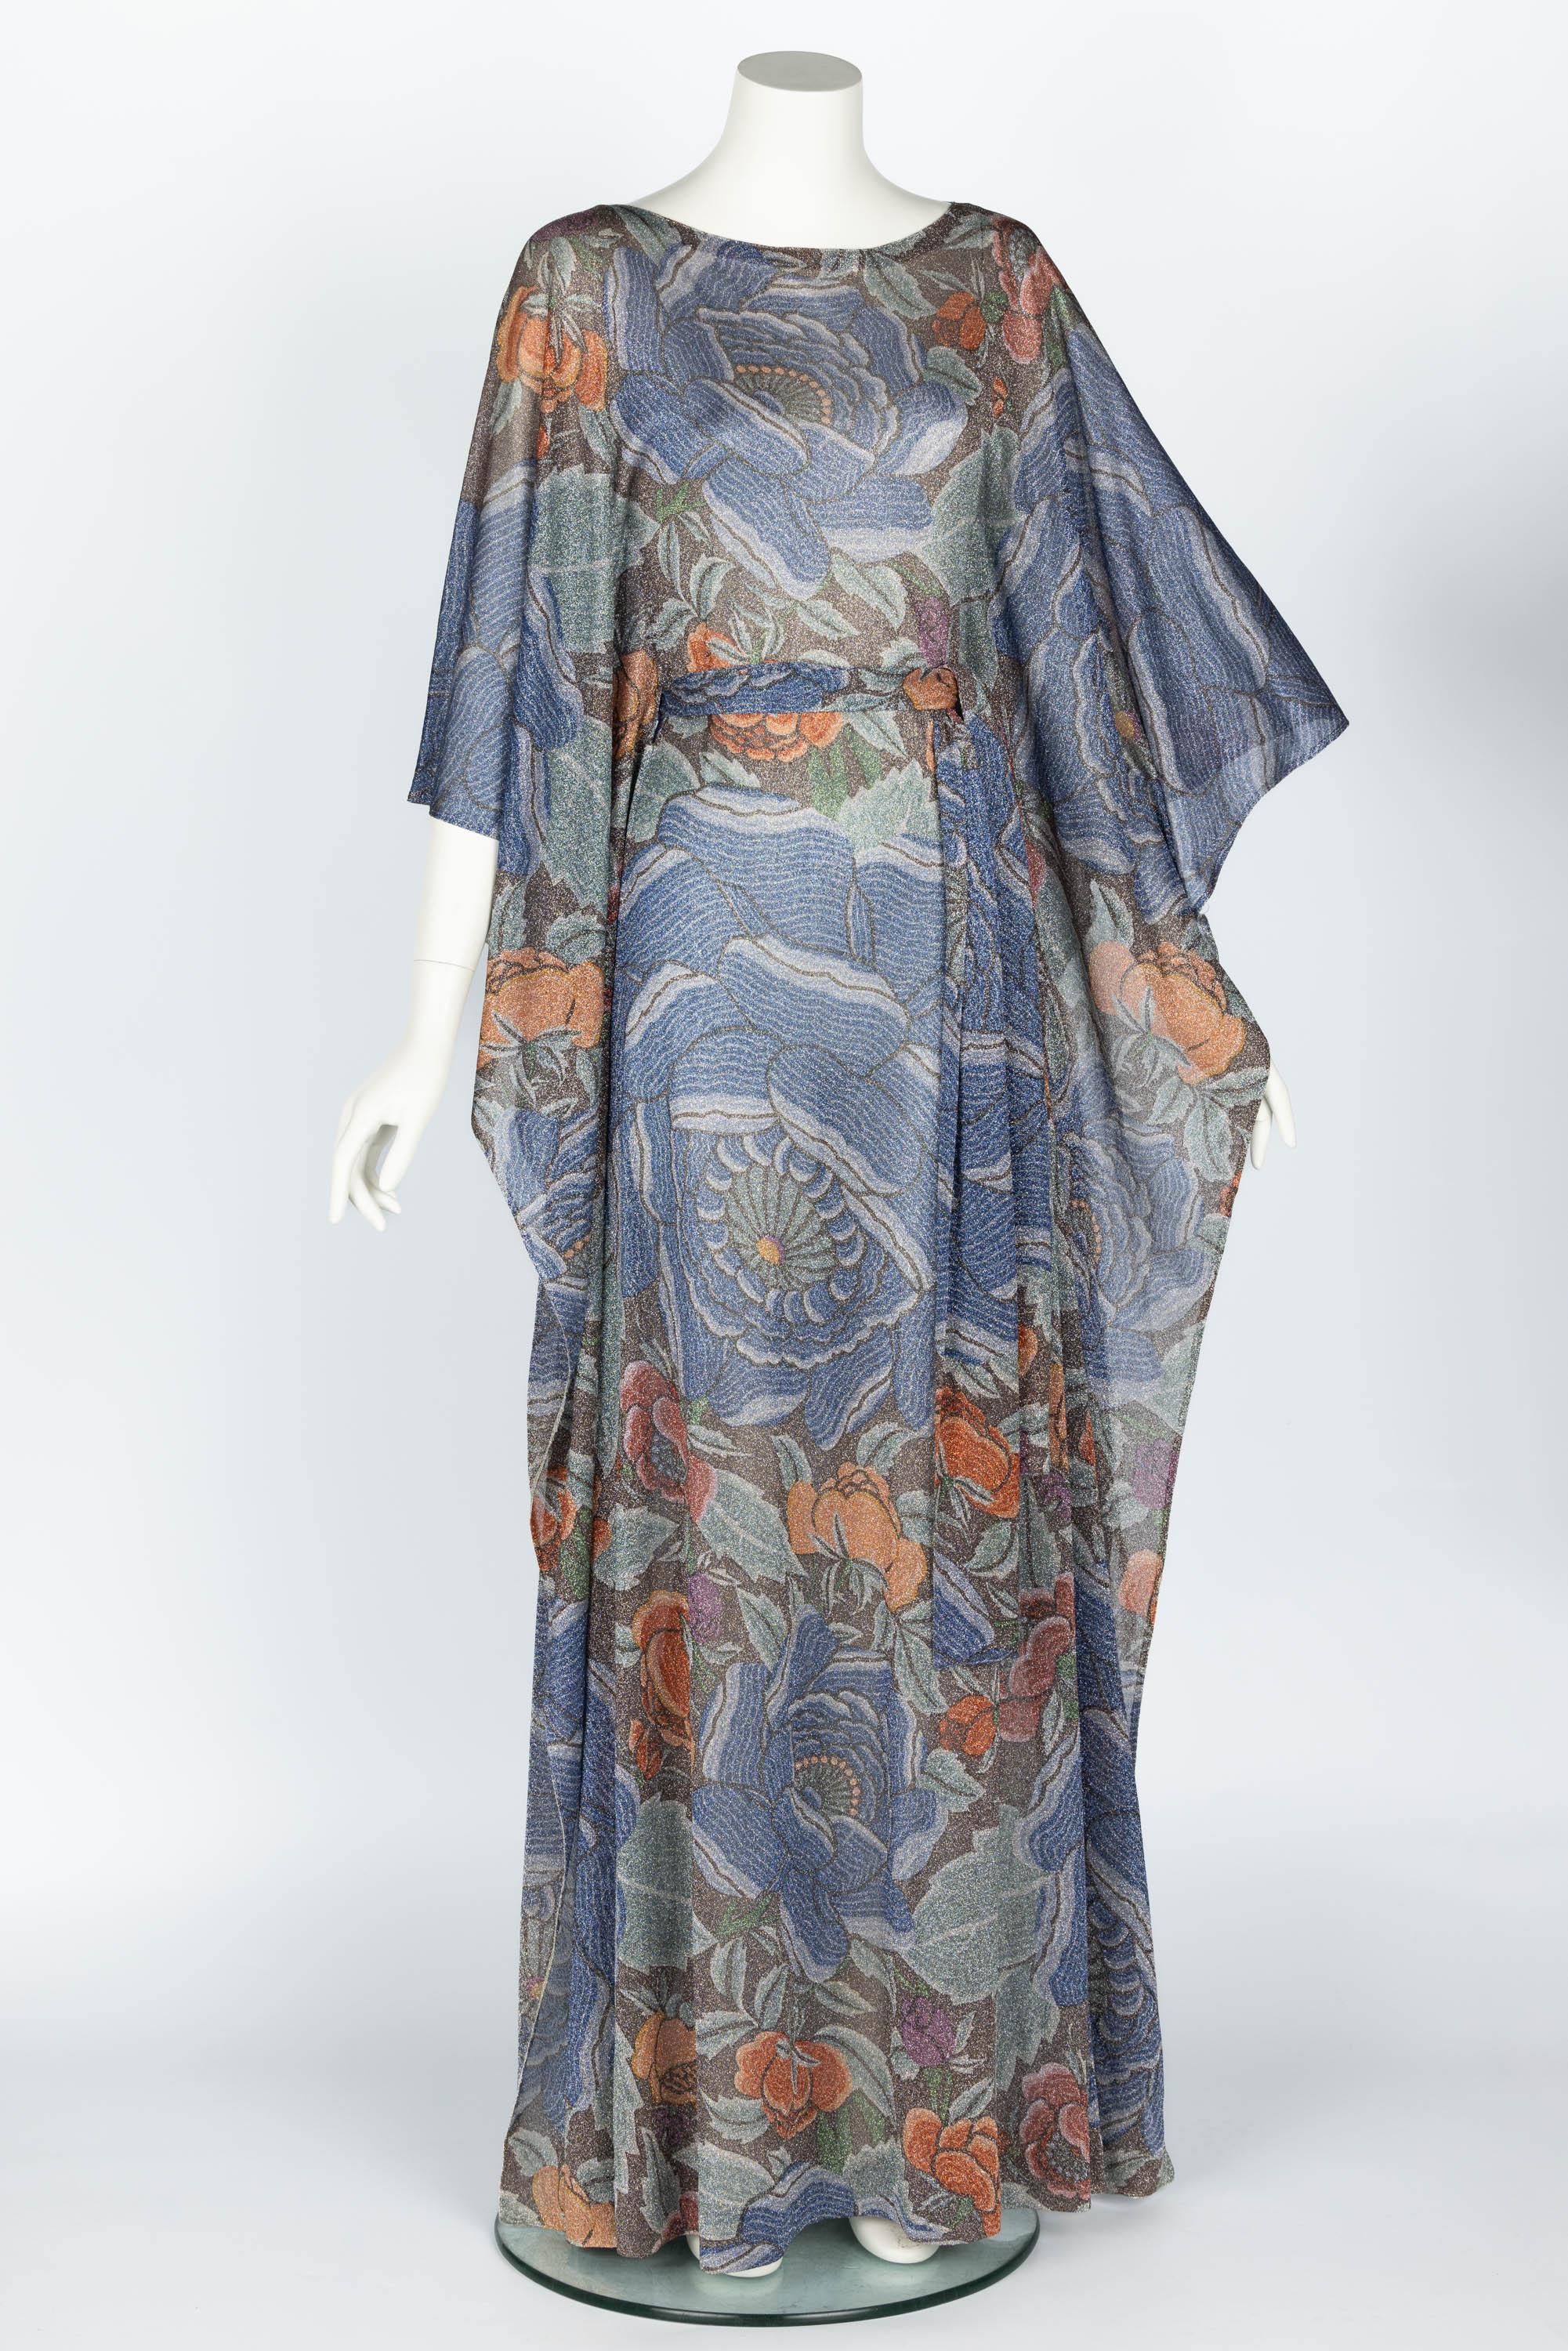 Iconic Missoni 1970s Floral Print Metallic Lurex Caftan Dress  In Excellent Condition For Sale In Boca Raton, FL